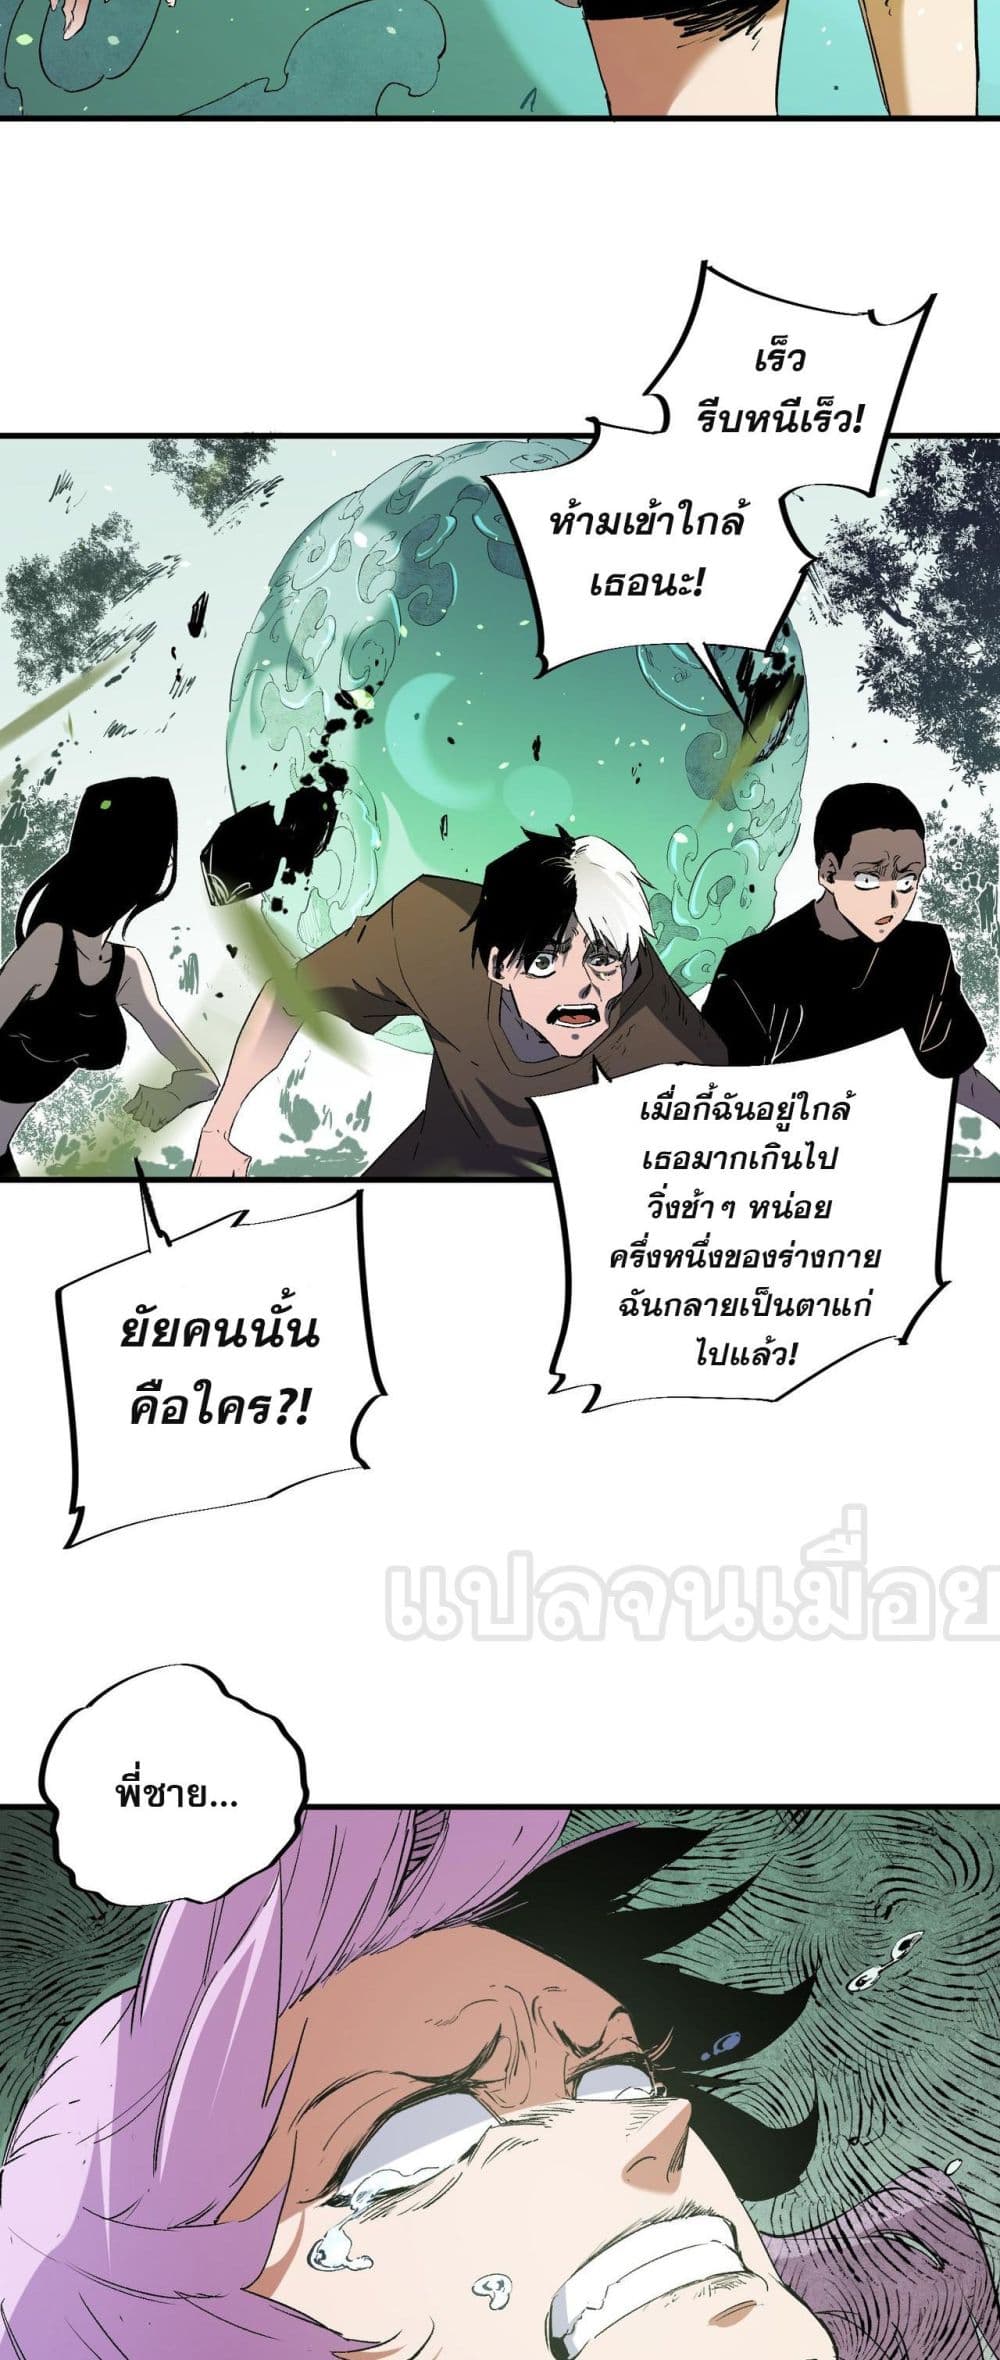 Job Changing for the Entire Population: The Jobless Me Will Terminate the Gods ฉันคือผู้เล่นไร้อาชีพที่สังหารเหล่าเทพ 77-77